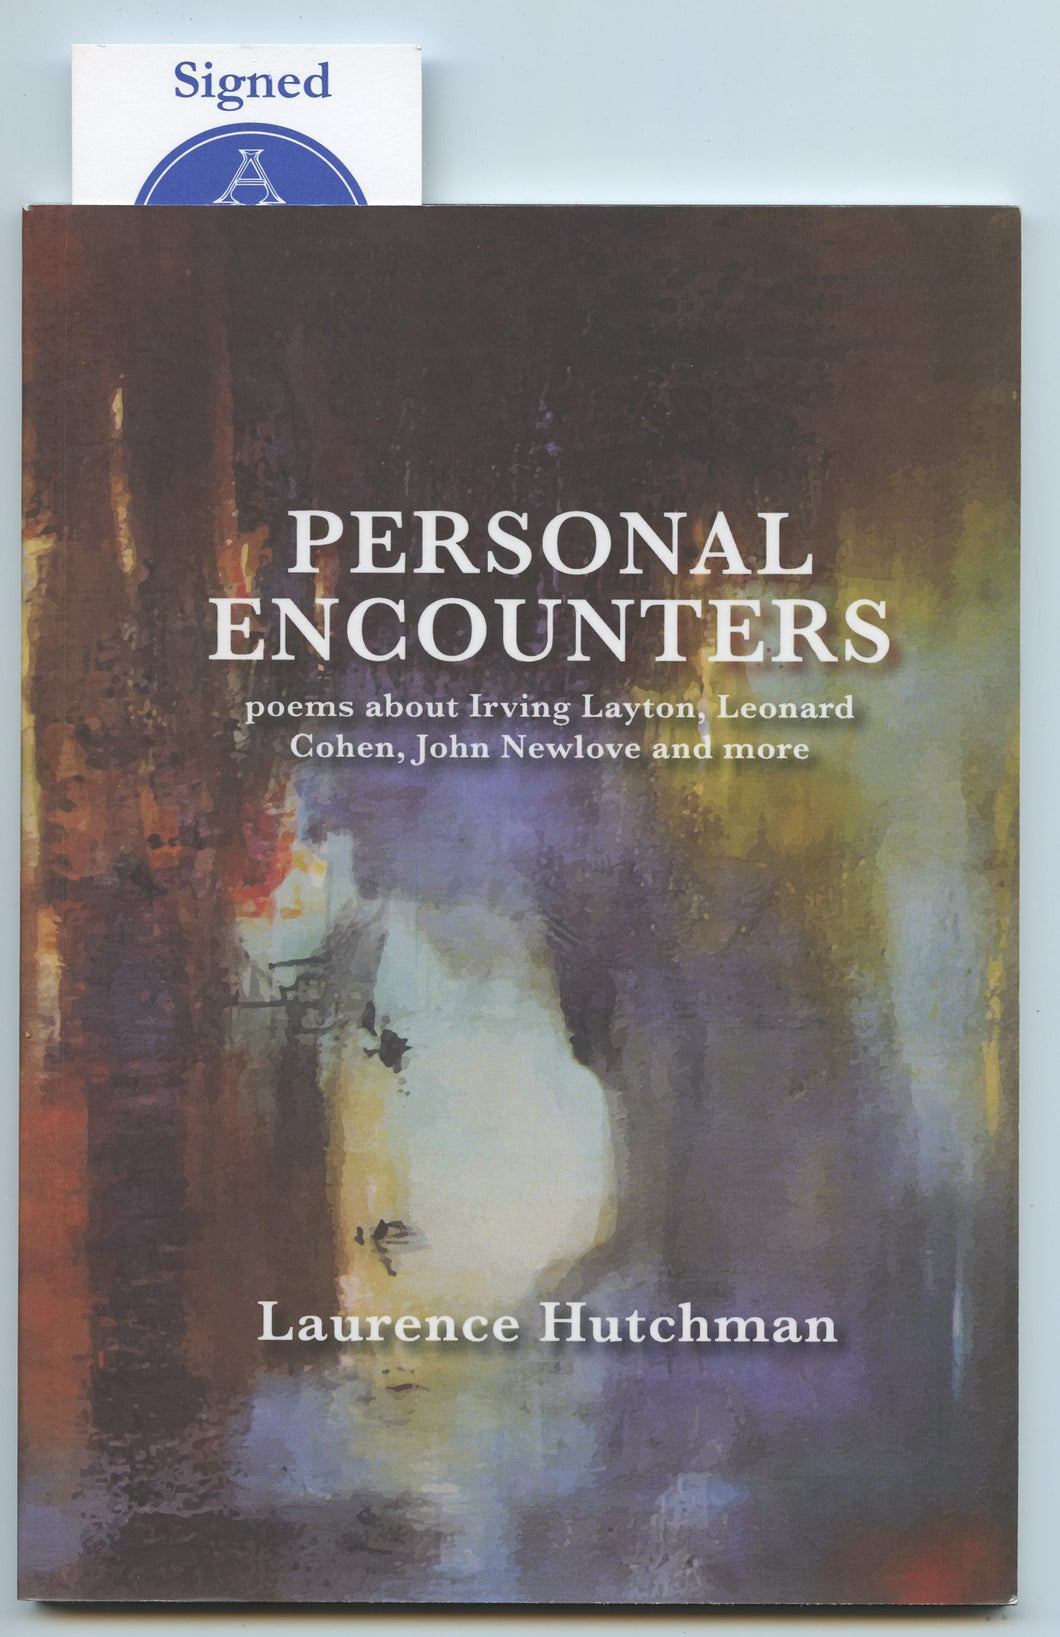 Personal Encounters: poems about Irving Layton, Leonard Cohen, John Newlove and more